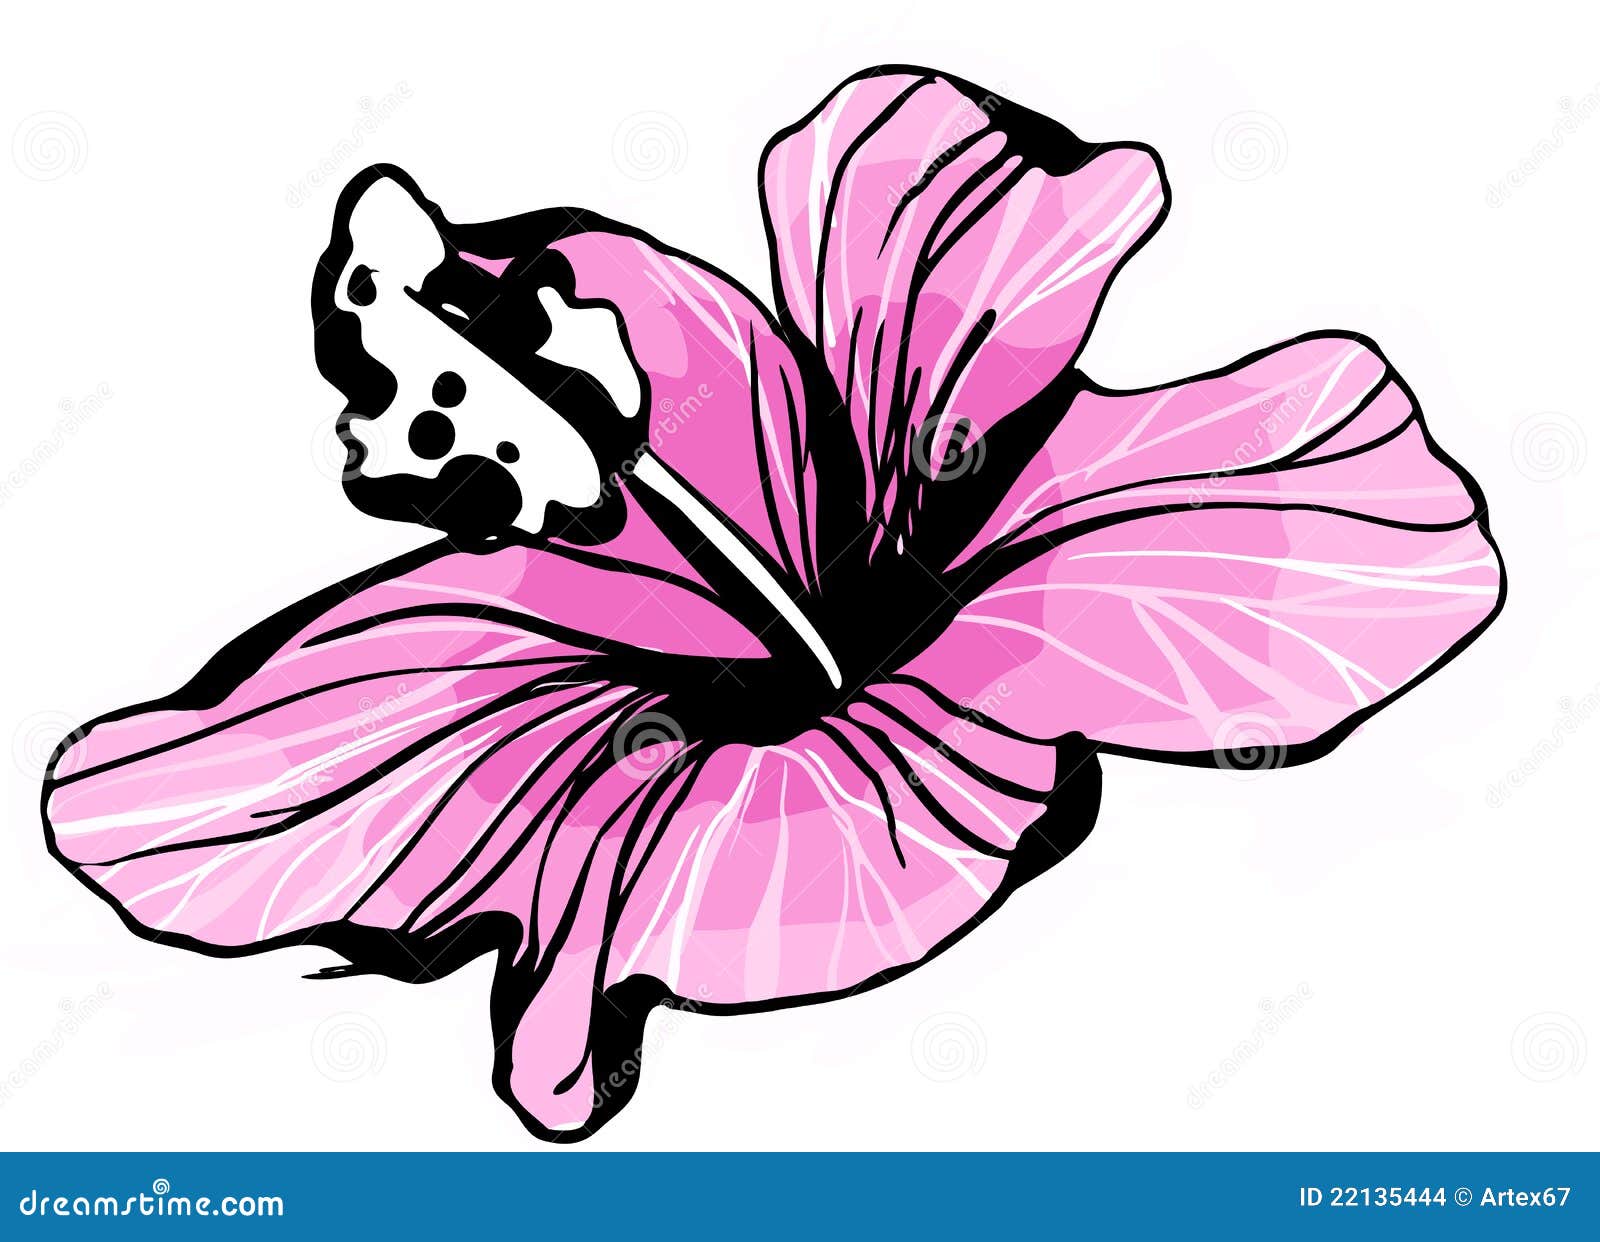 Hibiscus Flower Drawing - 9053 - Dryicons